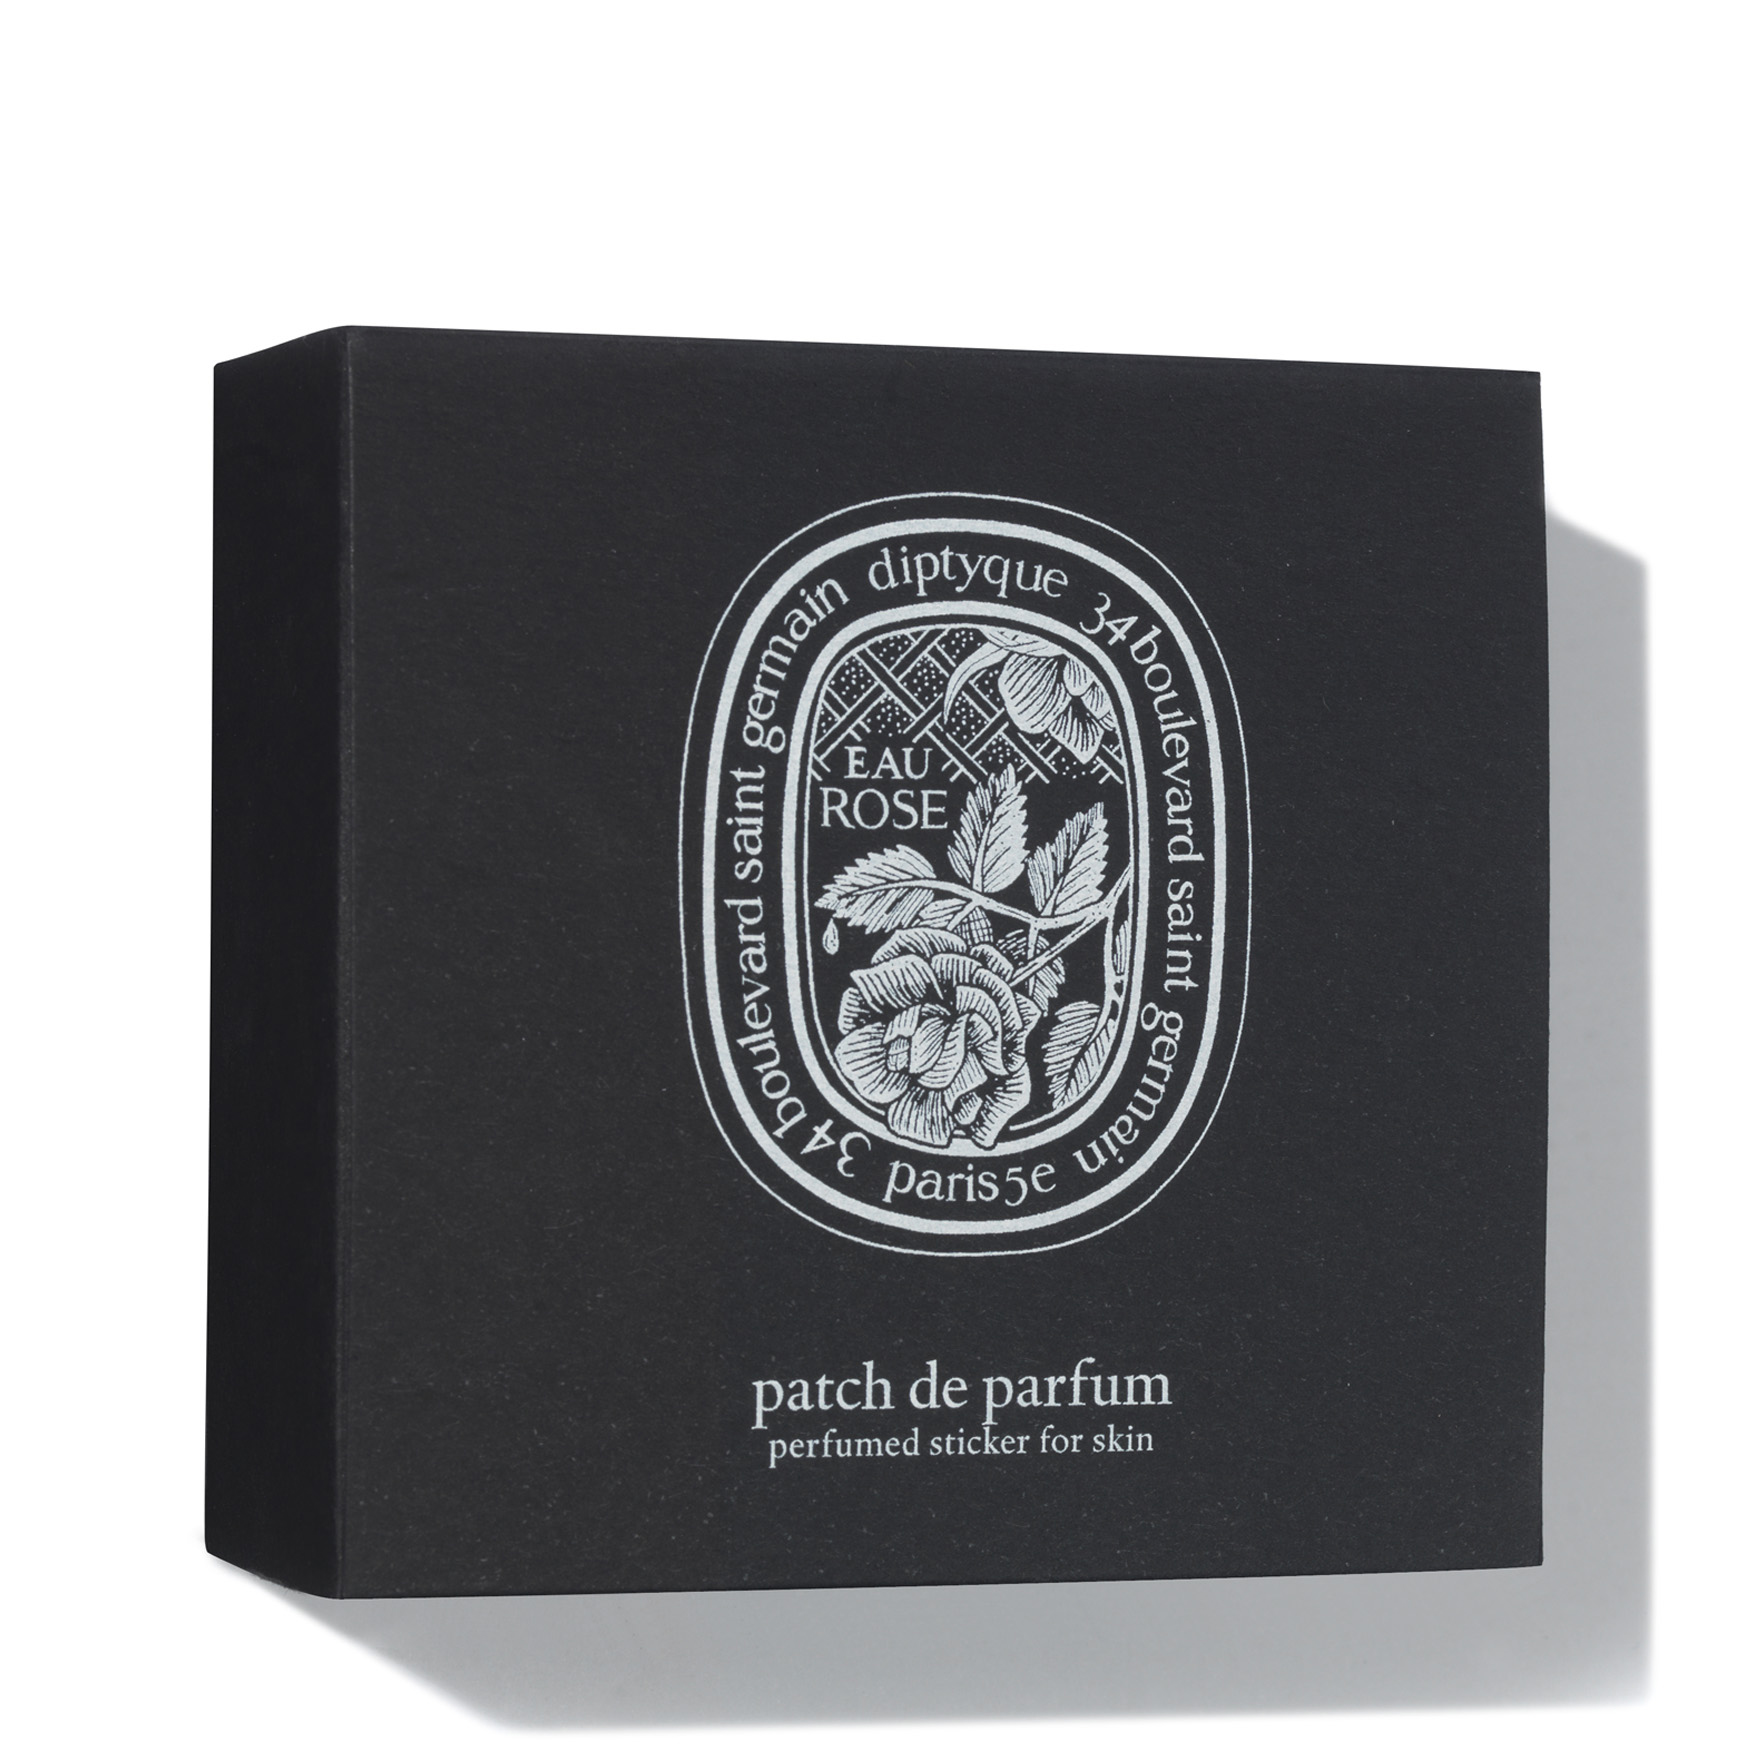 Diptyque Eau Rose Perfumed Stickers | Space NK